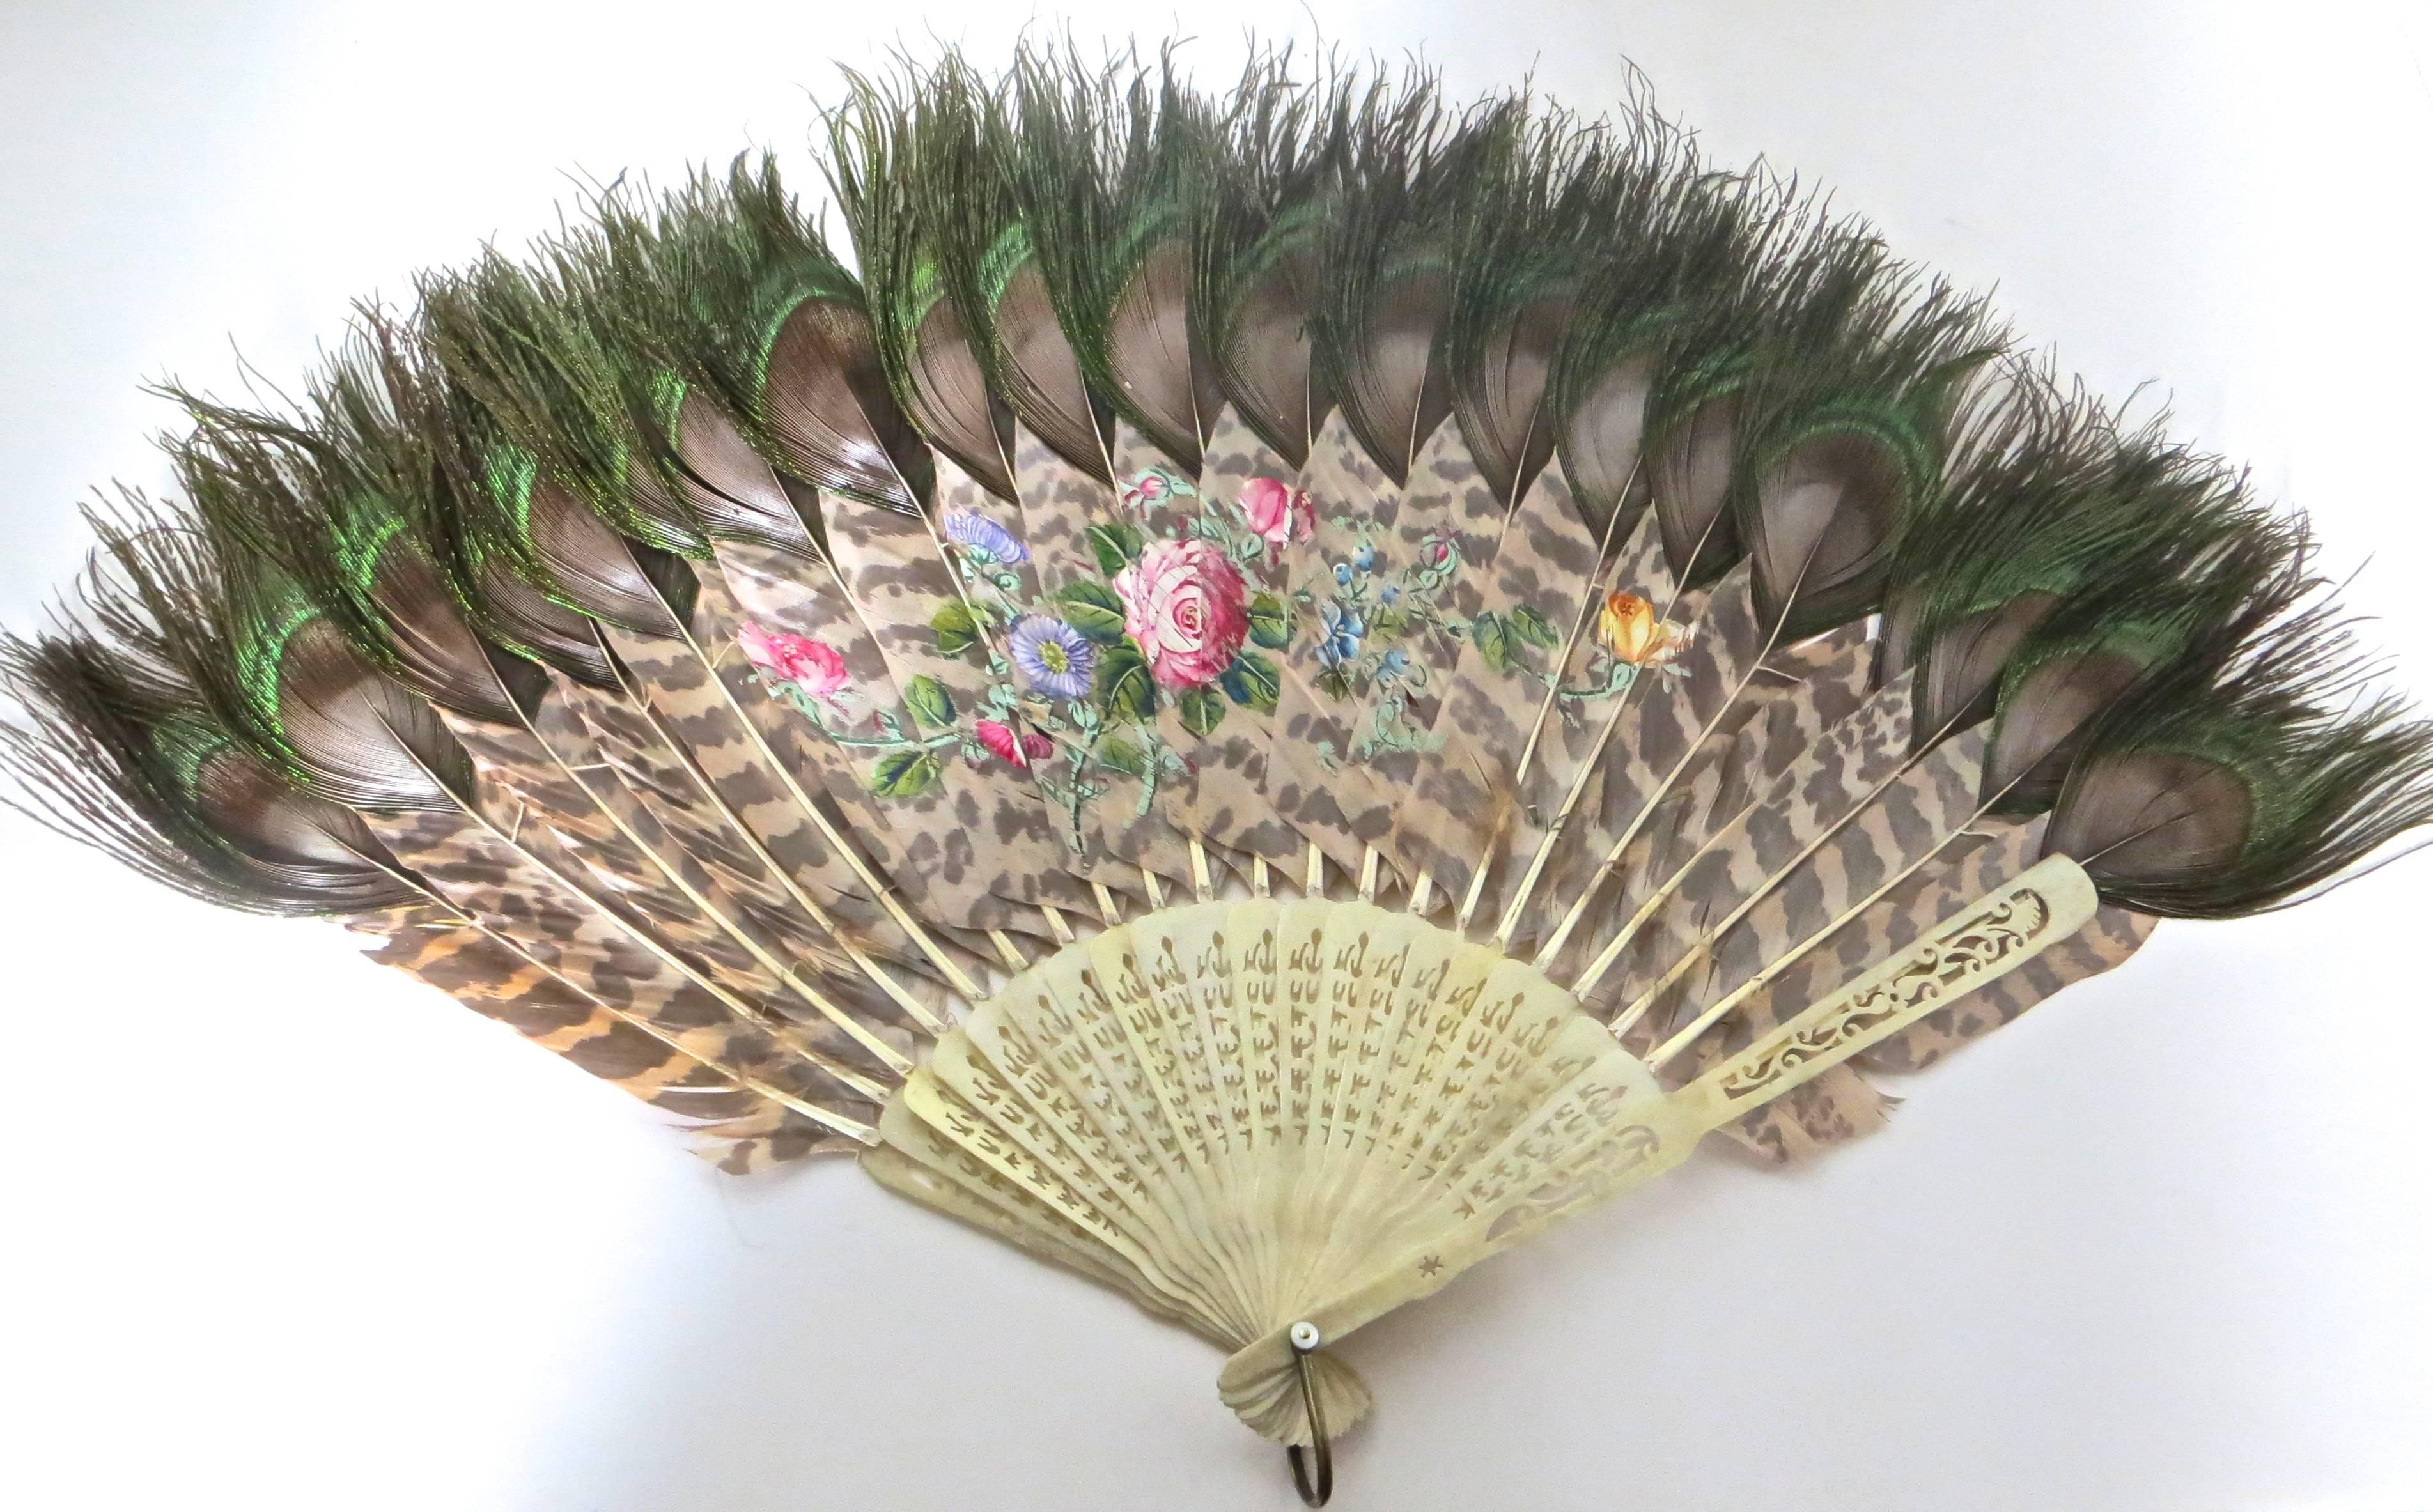 Japanese Hand Held Fan of Peacock Feathers, Japan, circa 1880s